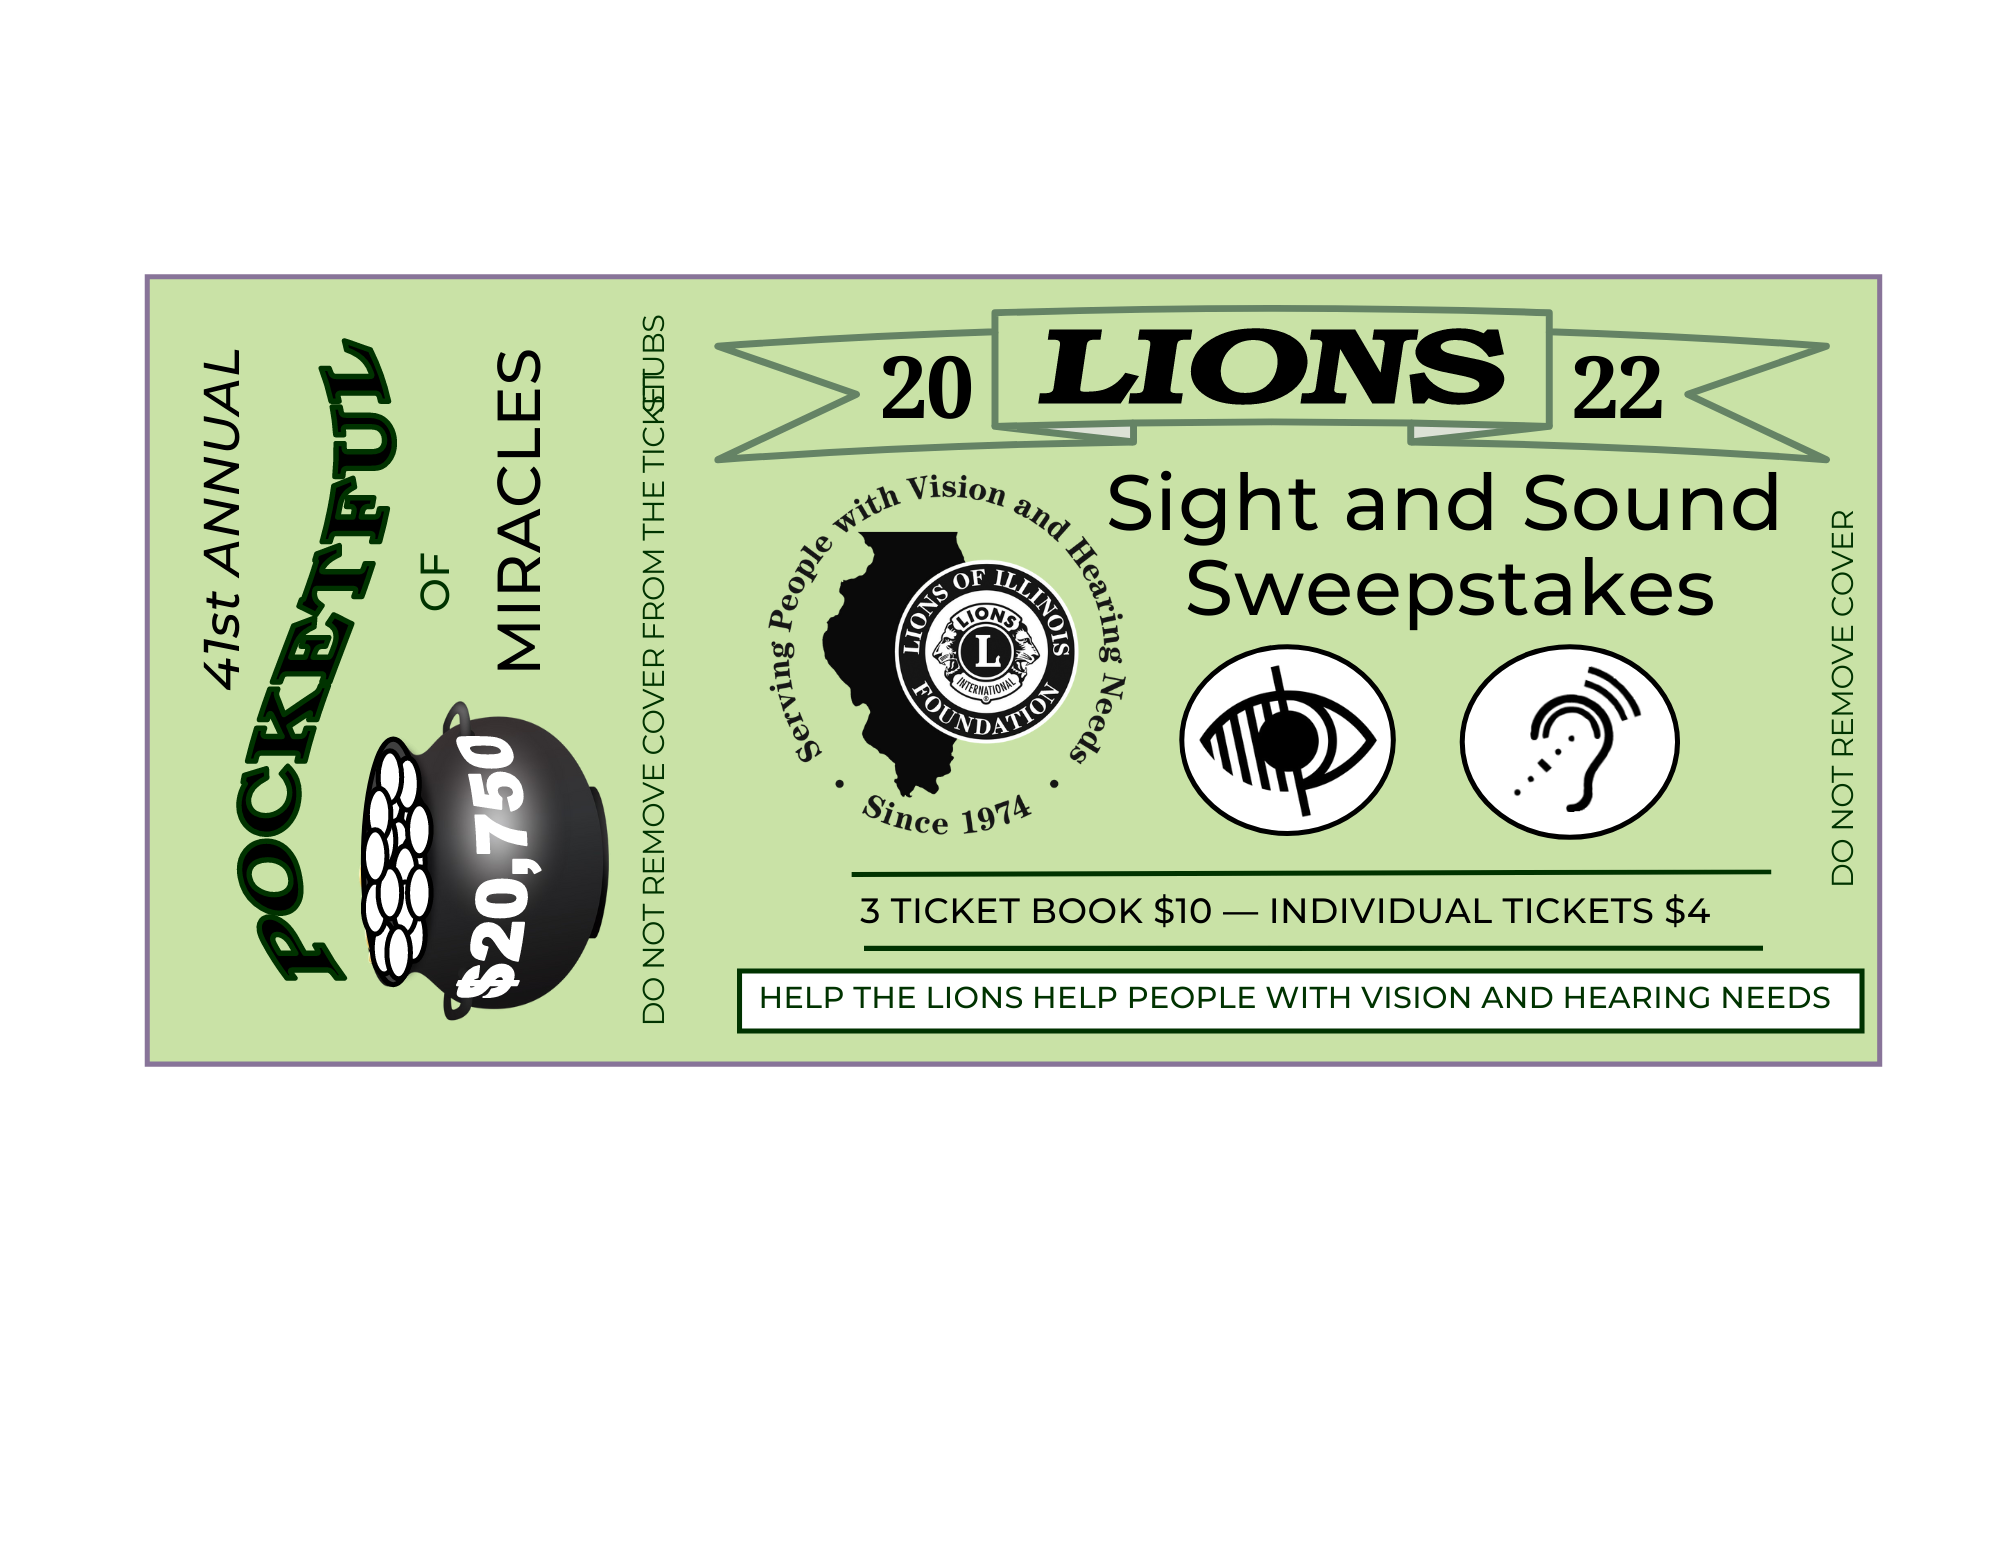 41st annual pocketful of miracles. Lions 2022 sight and sound sweepstakes. 3 ticket book $10- individual tickets $4. Help the lions help people with vision and hearing needs. Lions of Illinois foundation: serving people with vision and hearing needs since 1974. Do not remove cover from the ticket stubs. Do not remove cover.